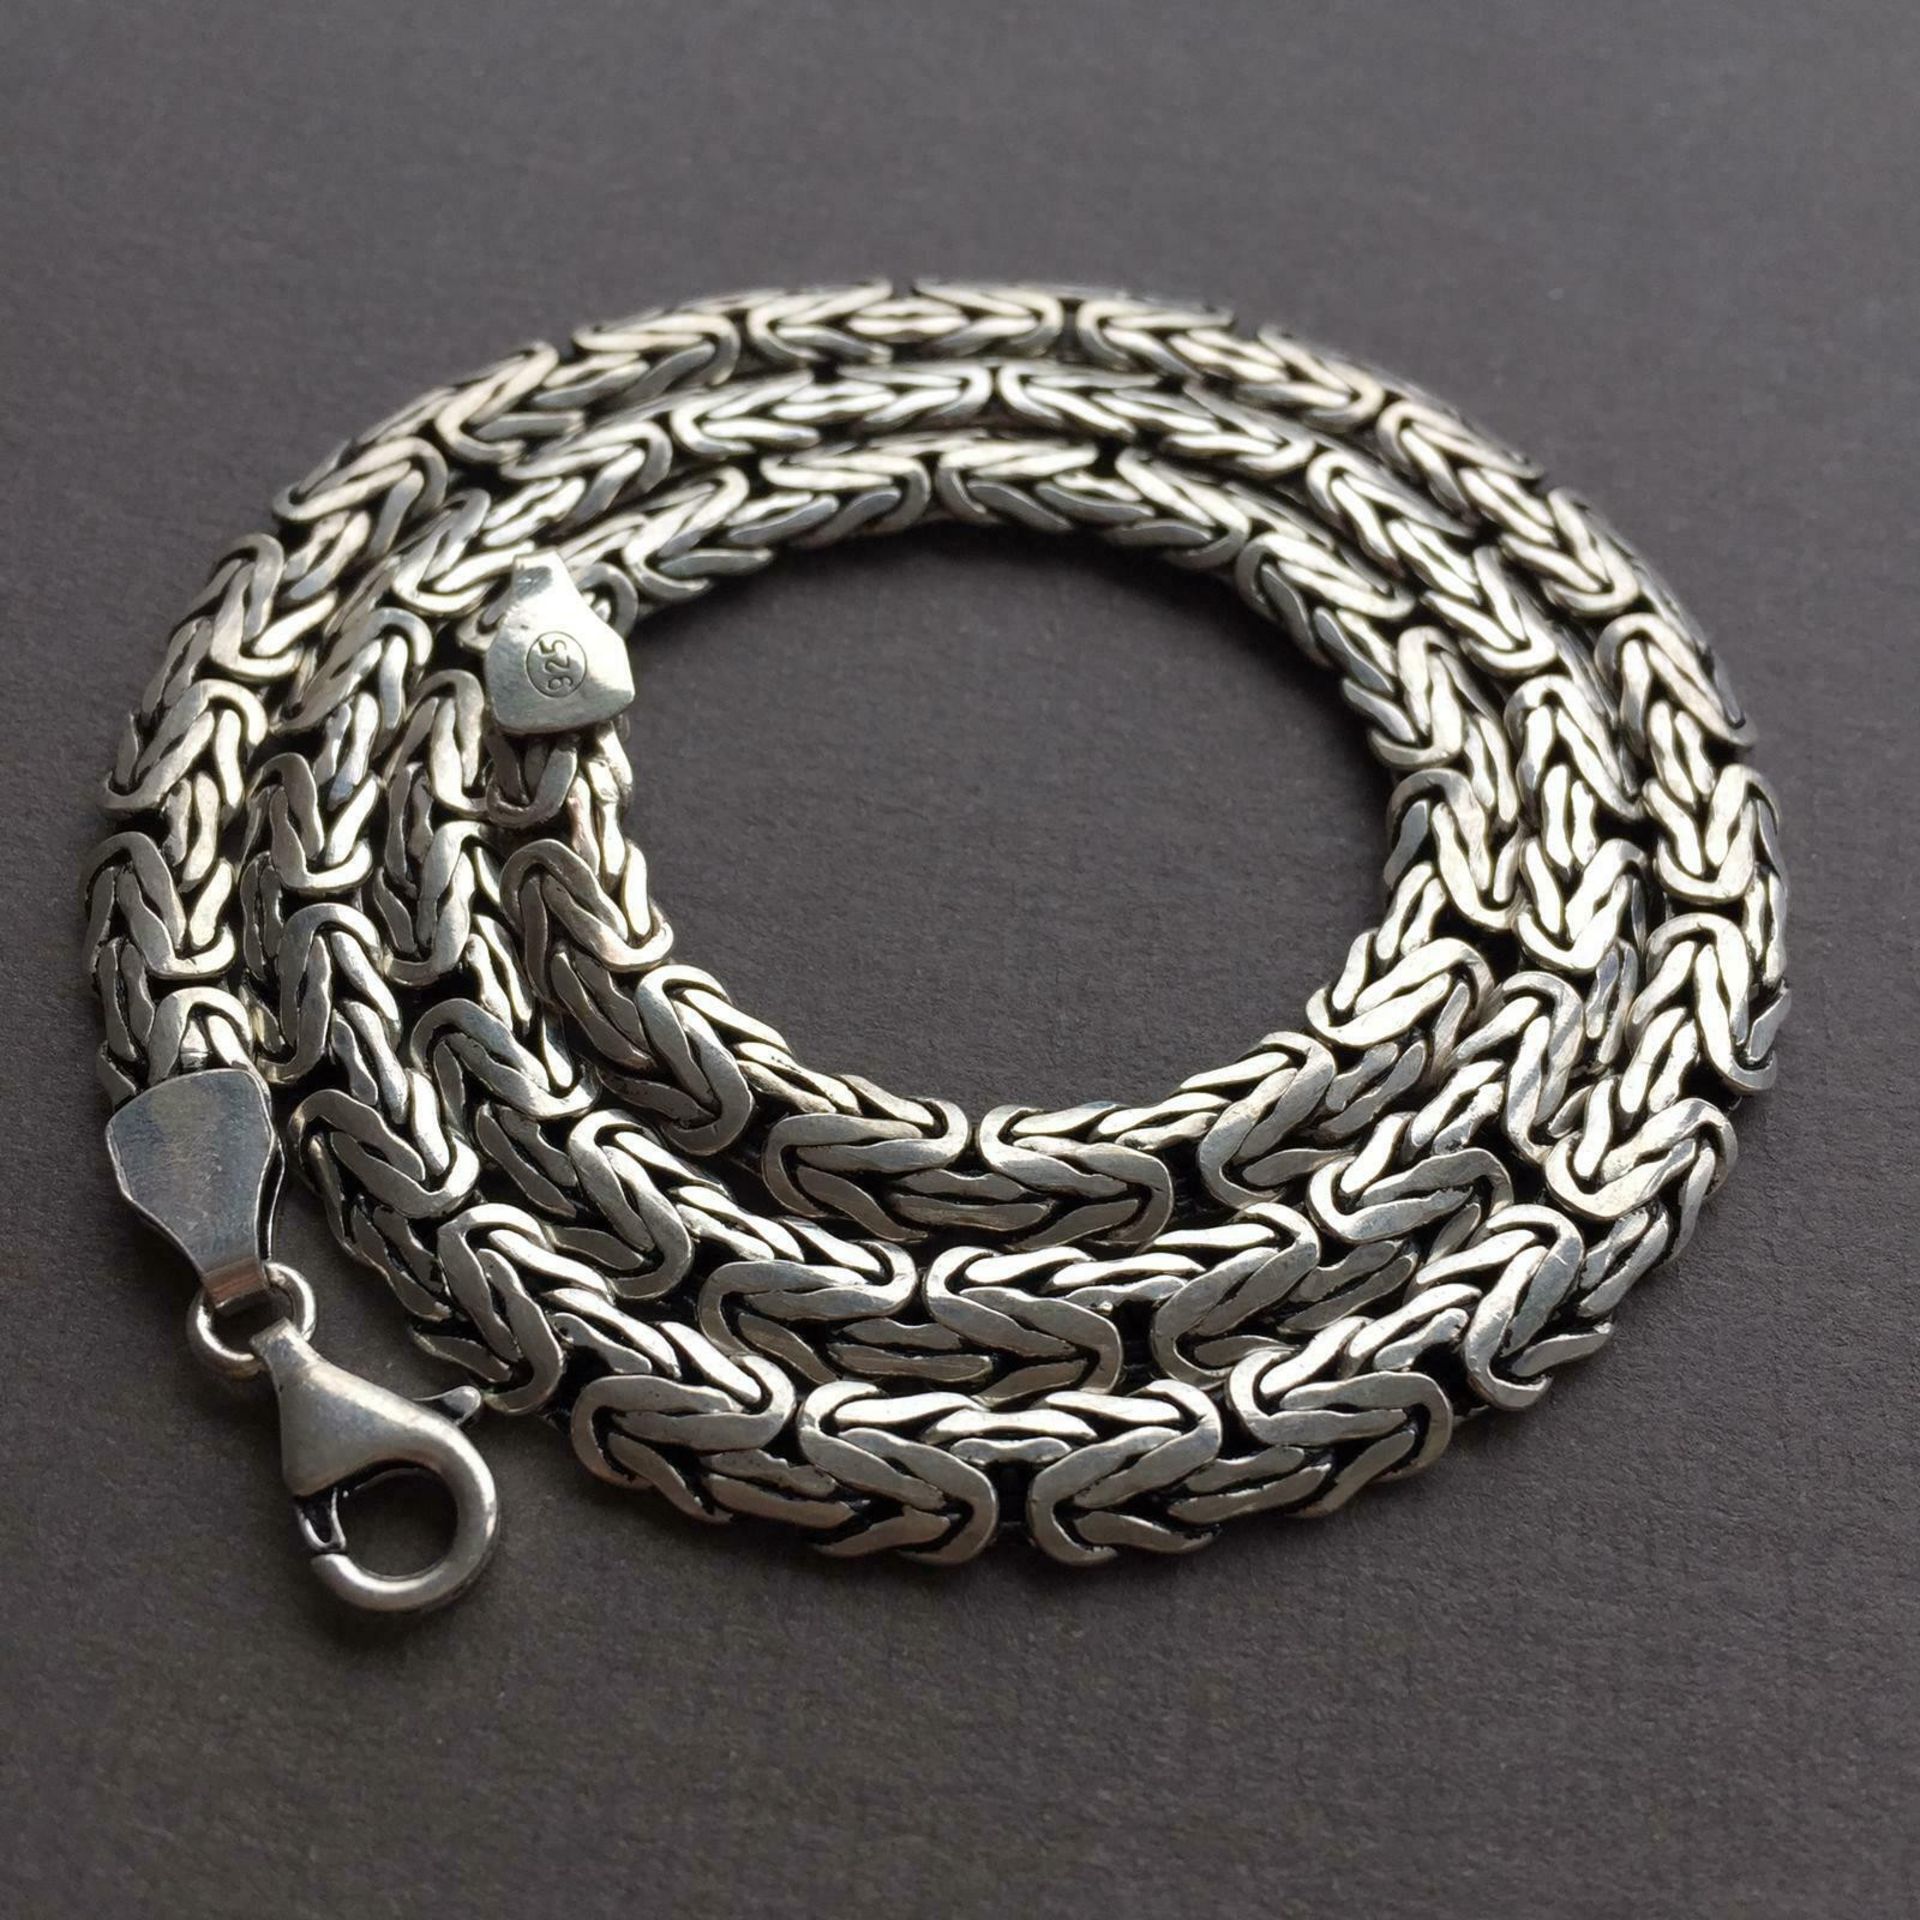 65 Cm / 26 In Men's Bali King Byzantine Chain Necklace 925 Sterling Silver - Image 4 of 4